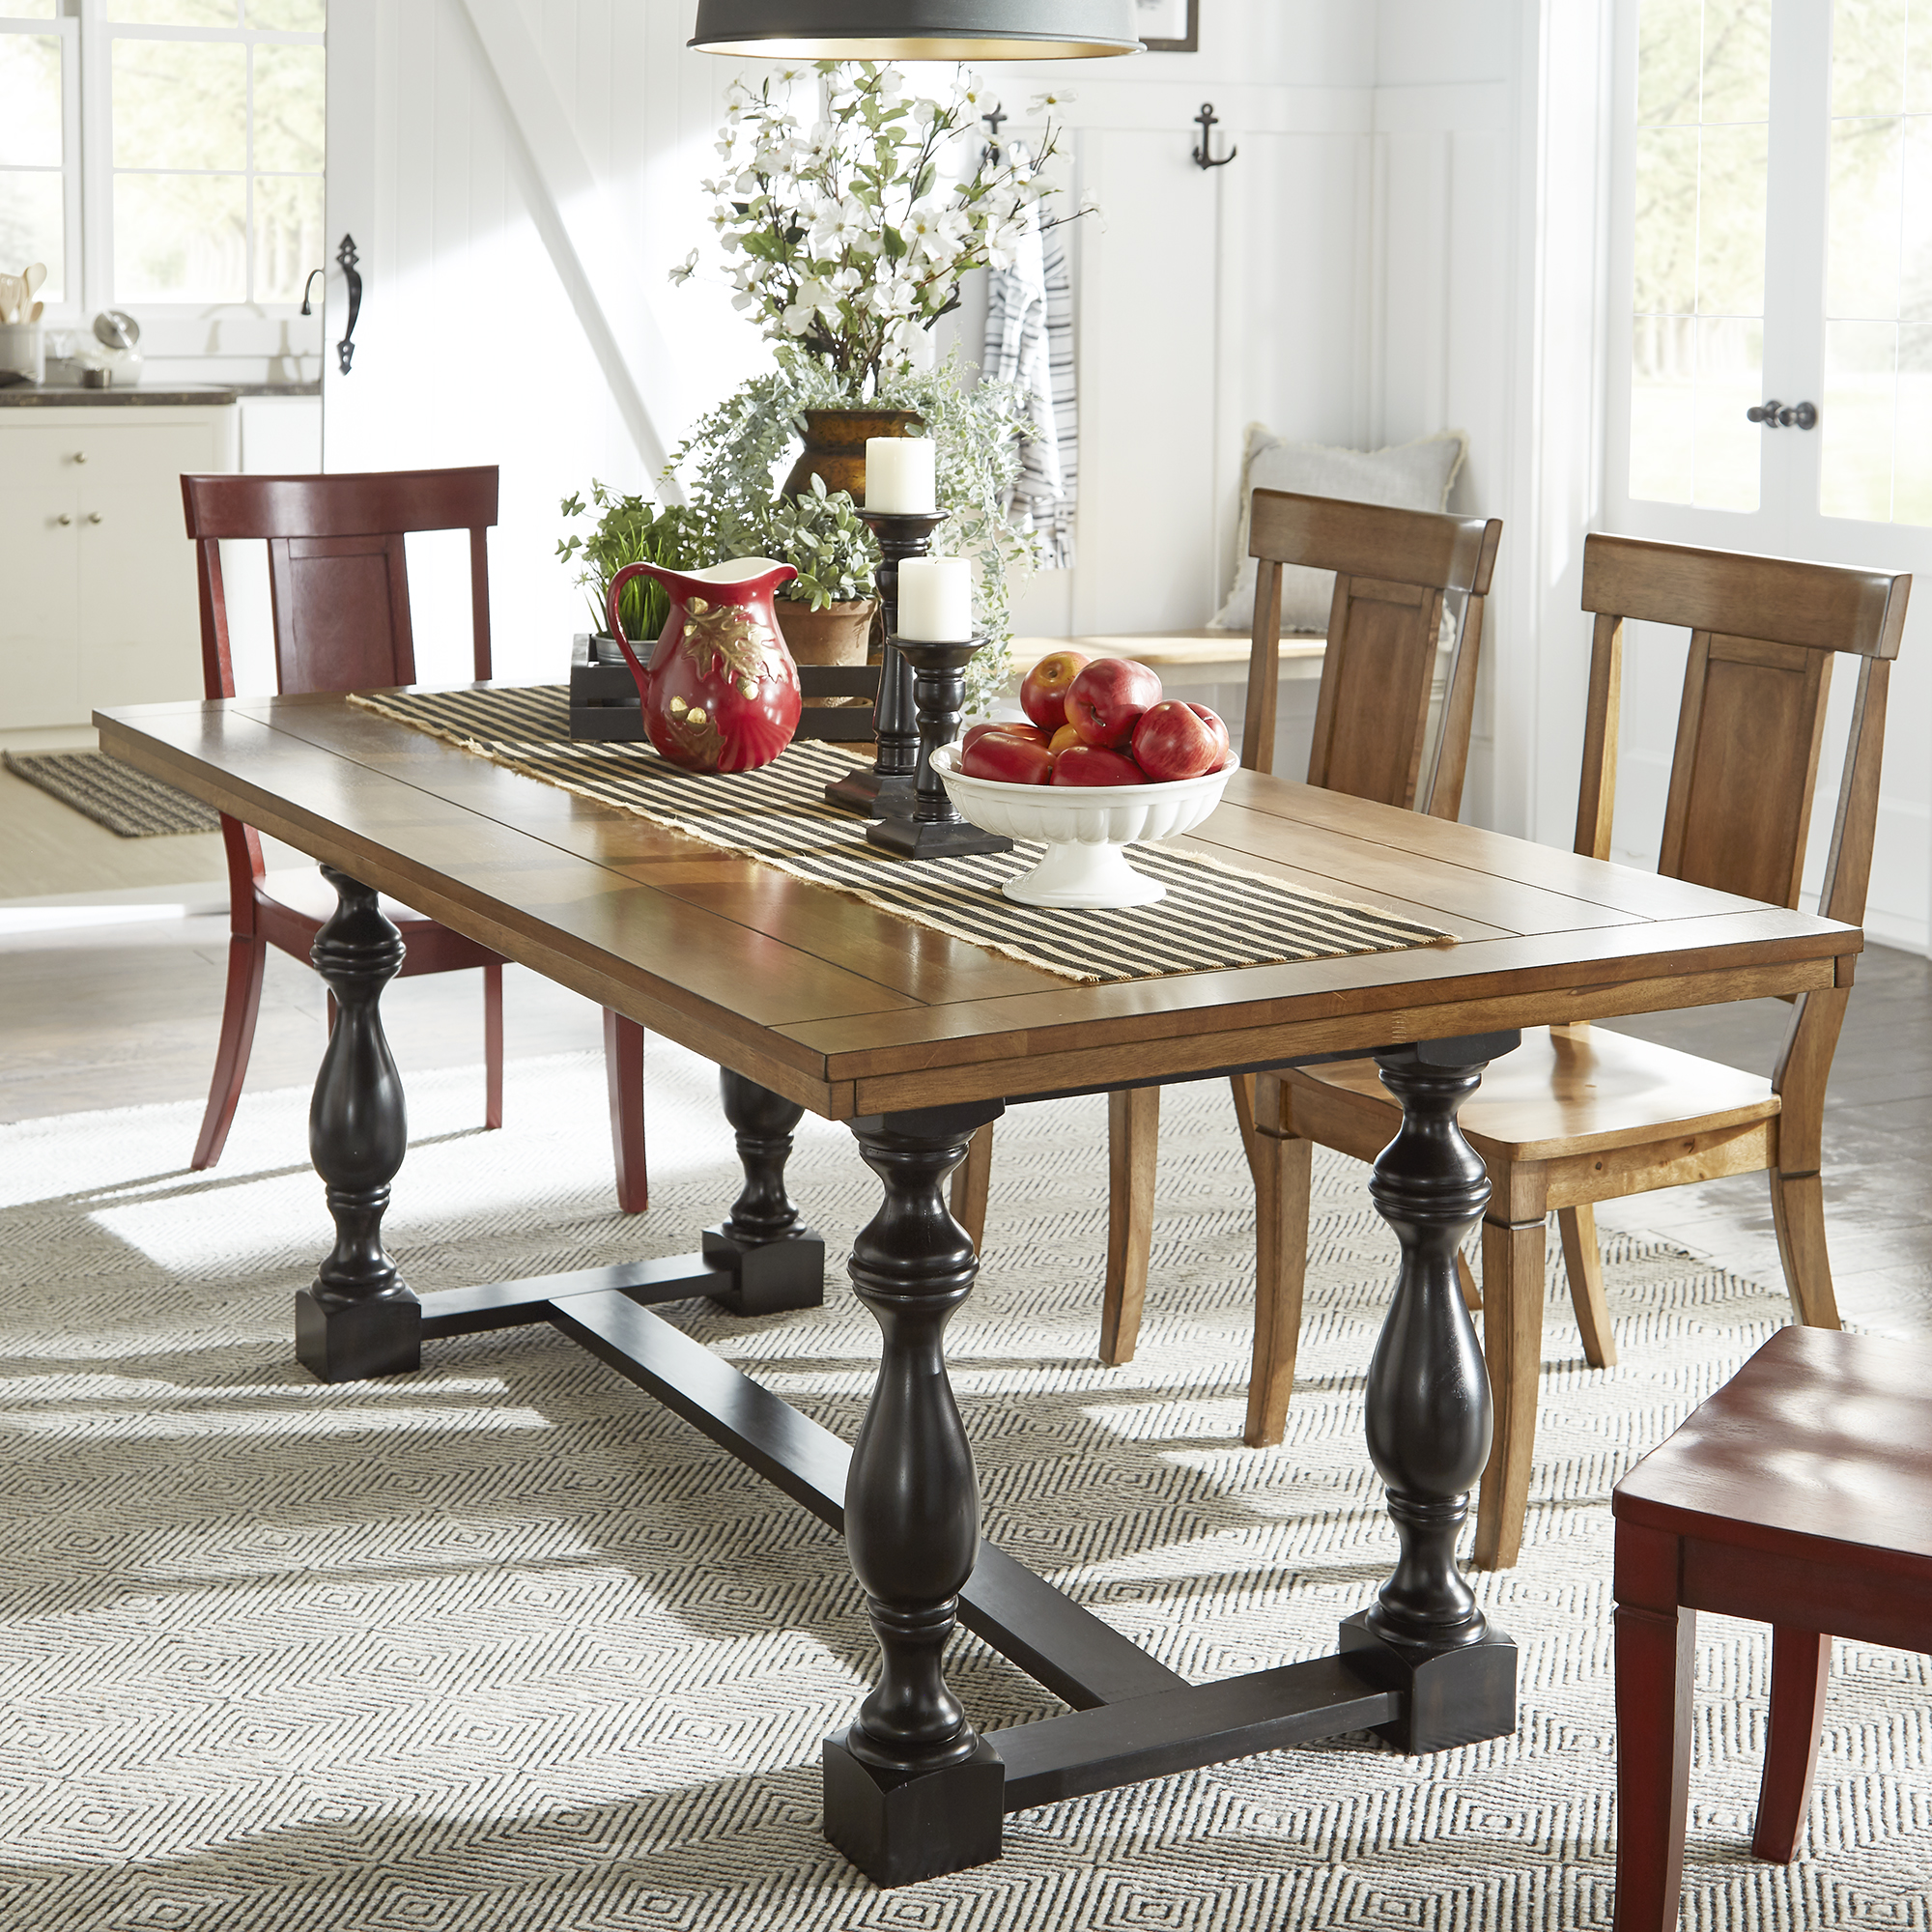 78-inch Oak Top Dining Table with Turned Leg Trestle Base